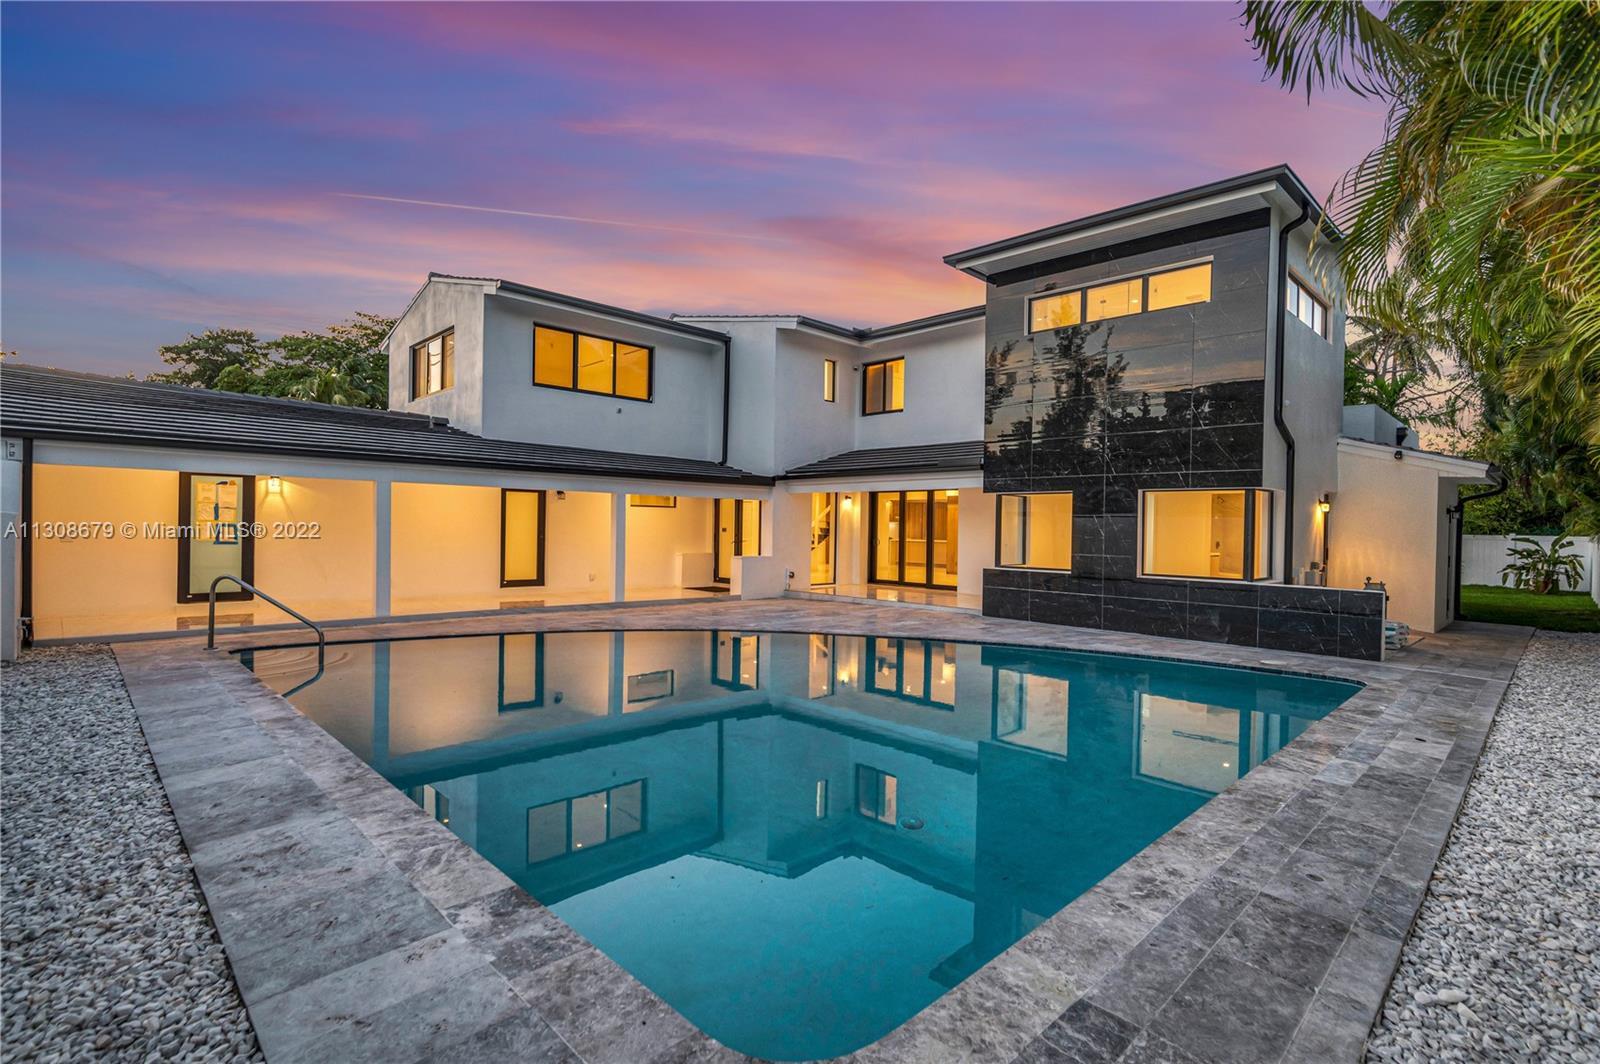 Custom New Construction in the heart of Miami Beach. Marvelously located on an oversized lot just 3 